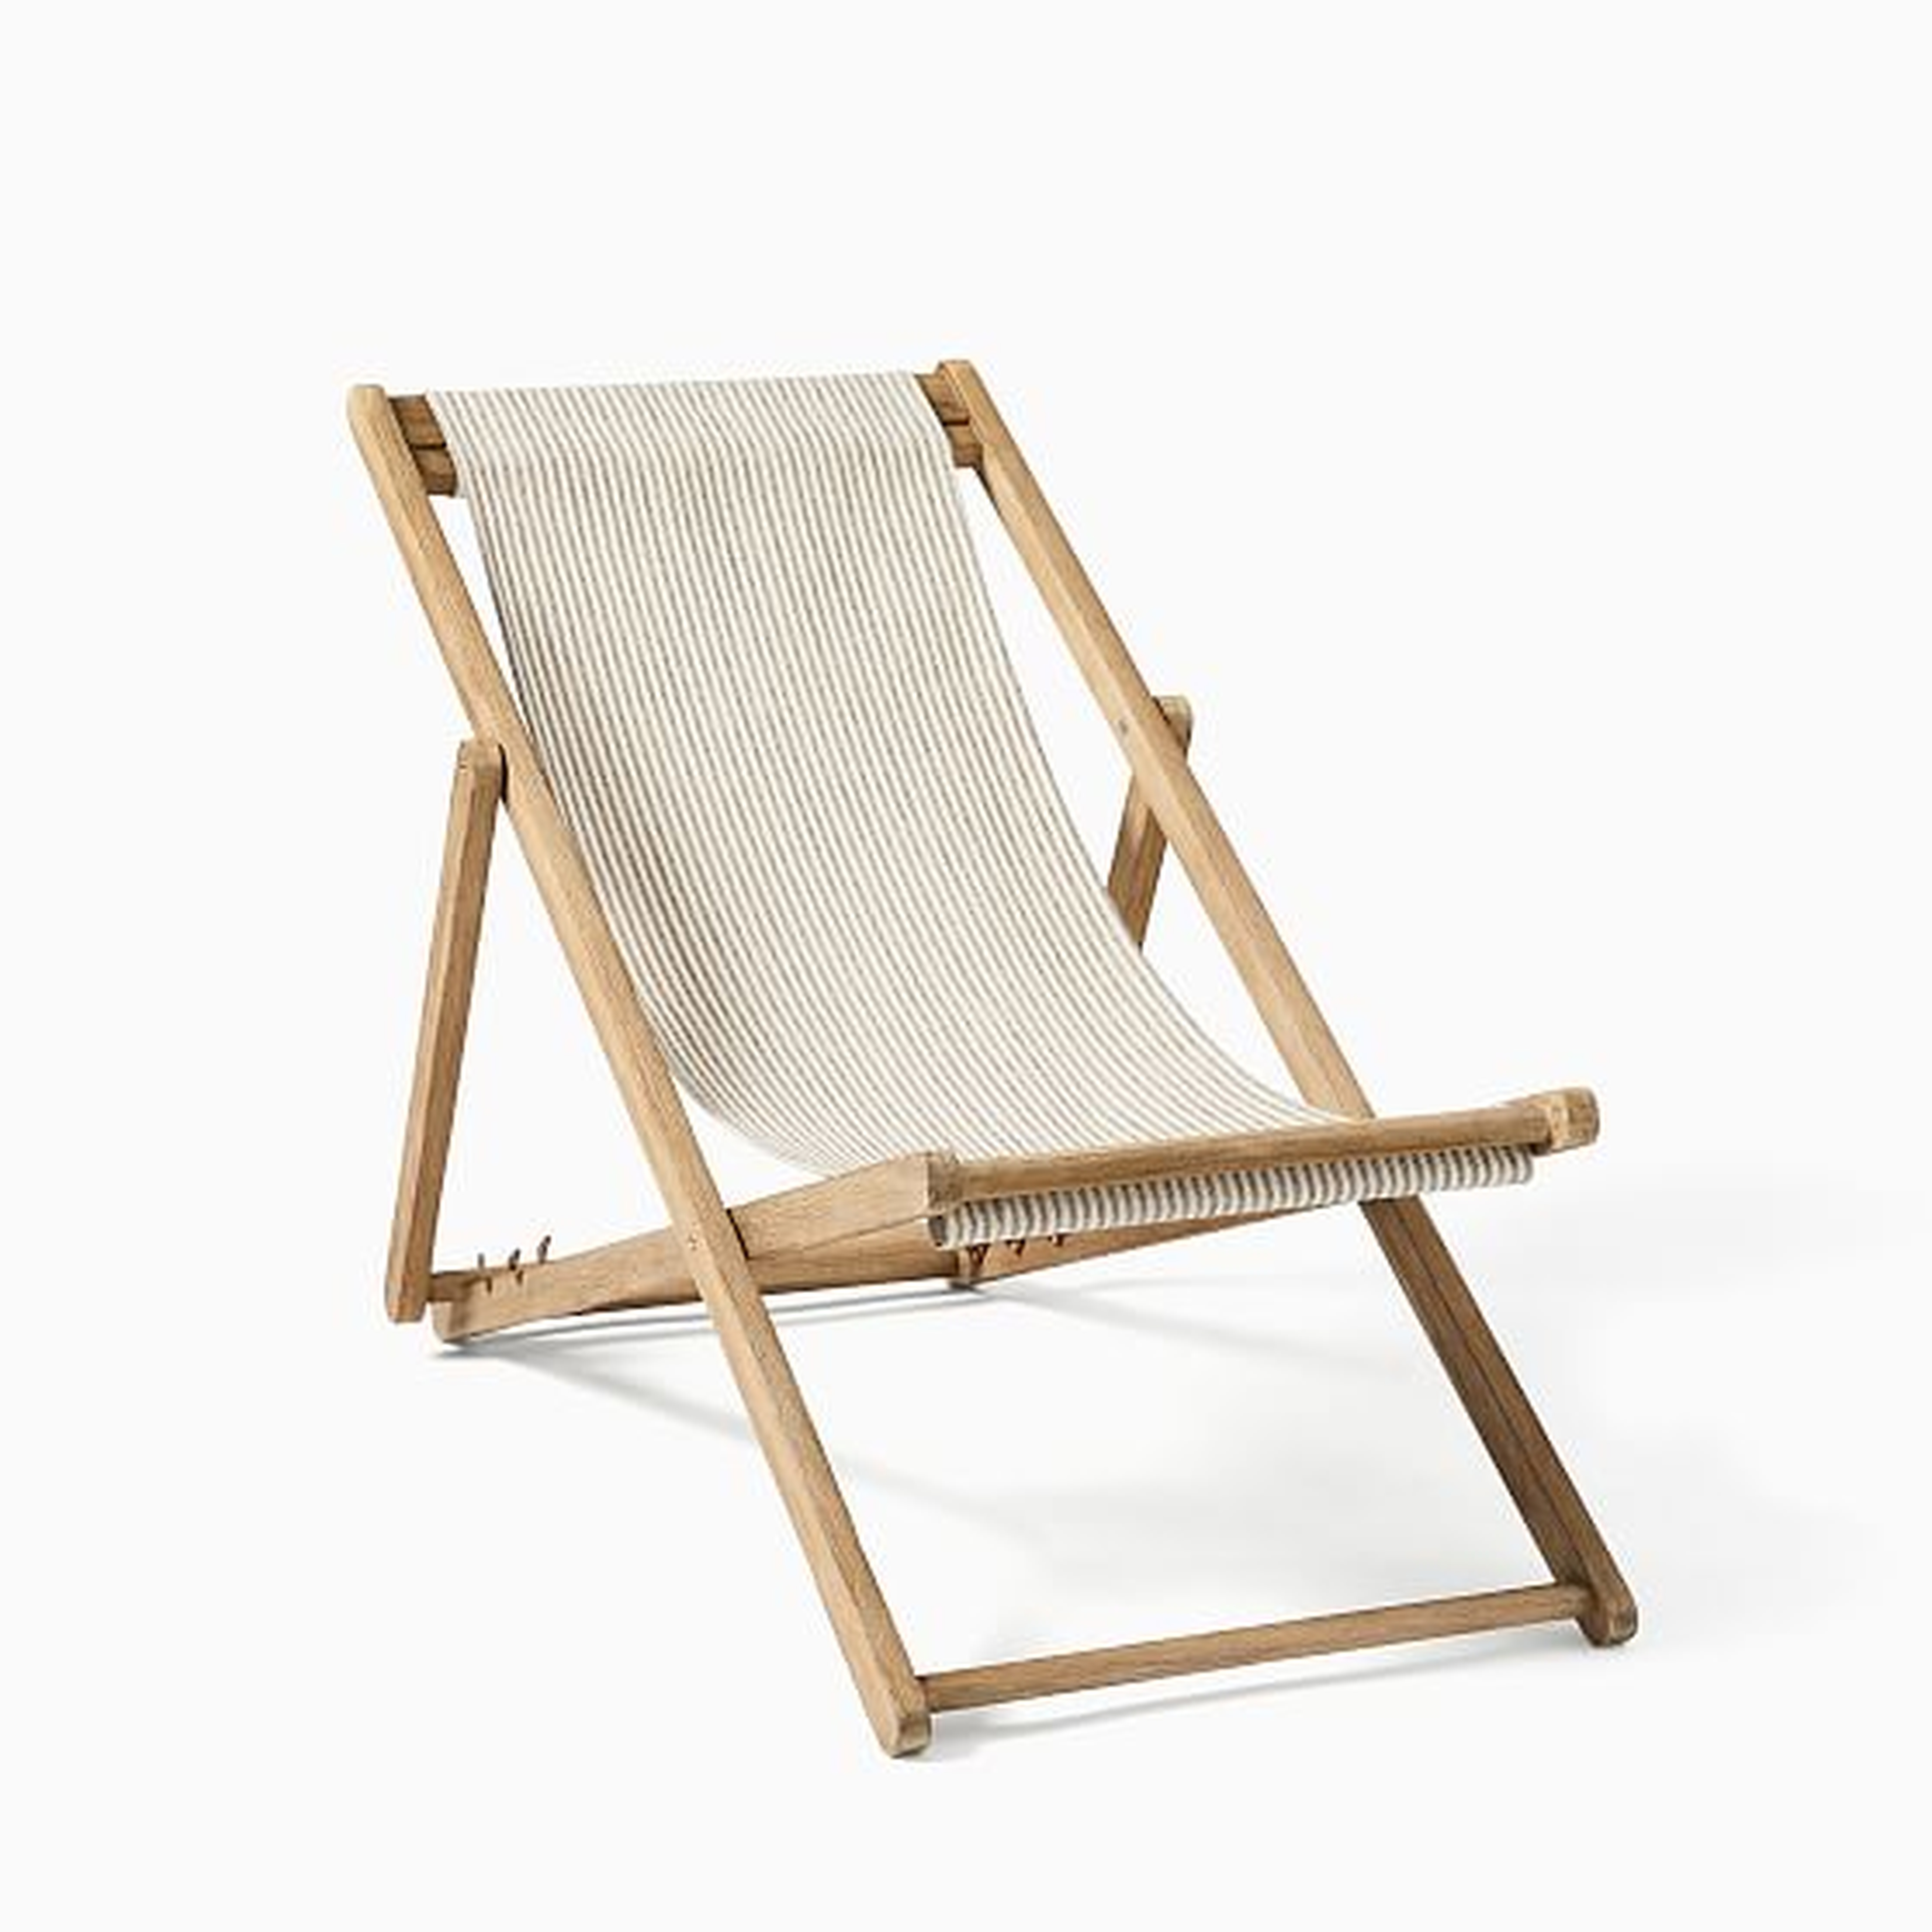 Sydney Outdoor Sling Chair, Gray and White Stripe - West Elm